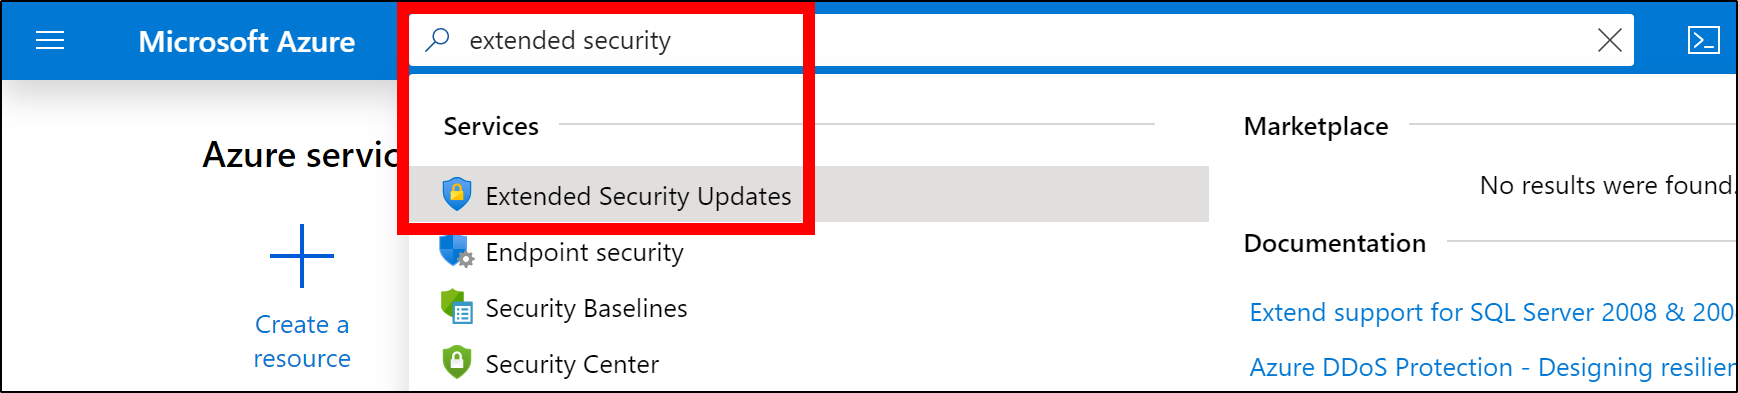 Search for Extended Security Updates in the Azure Portal